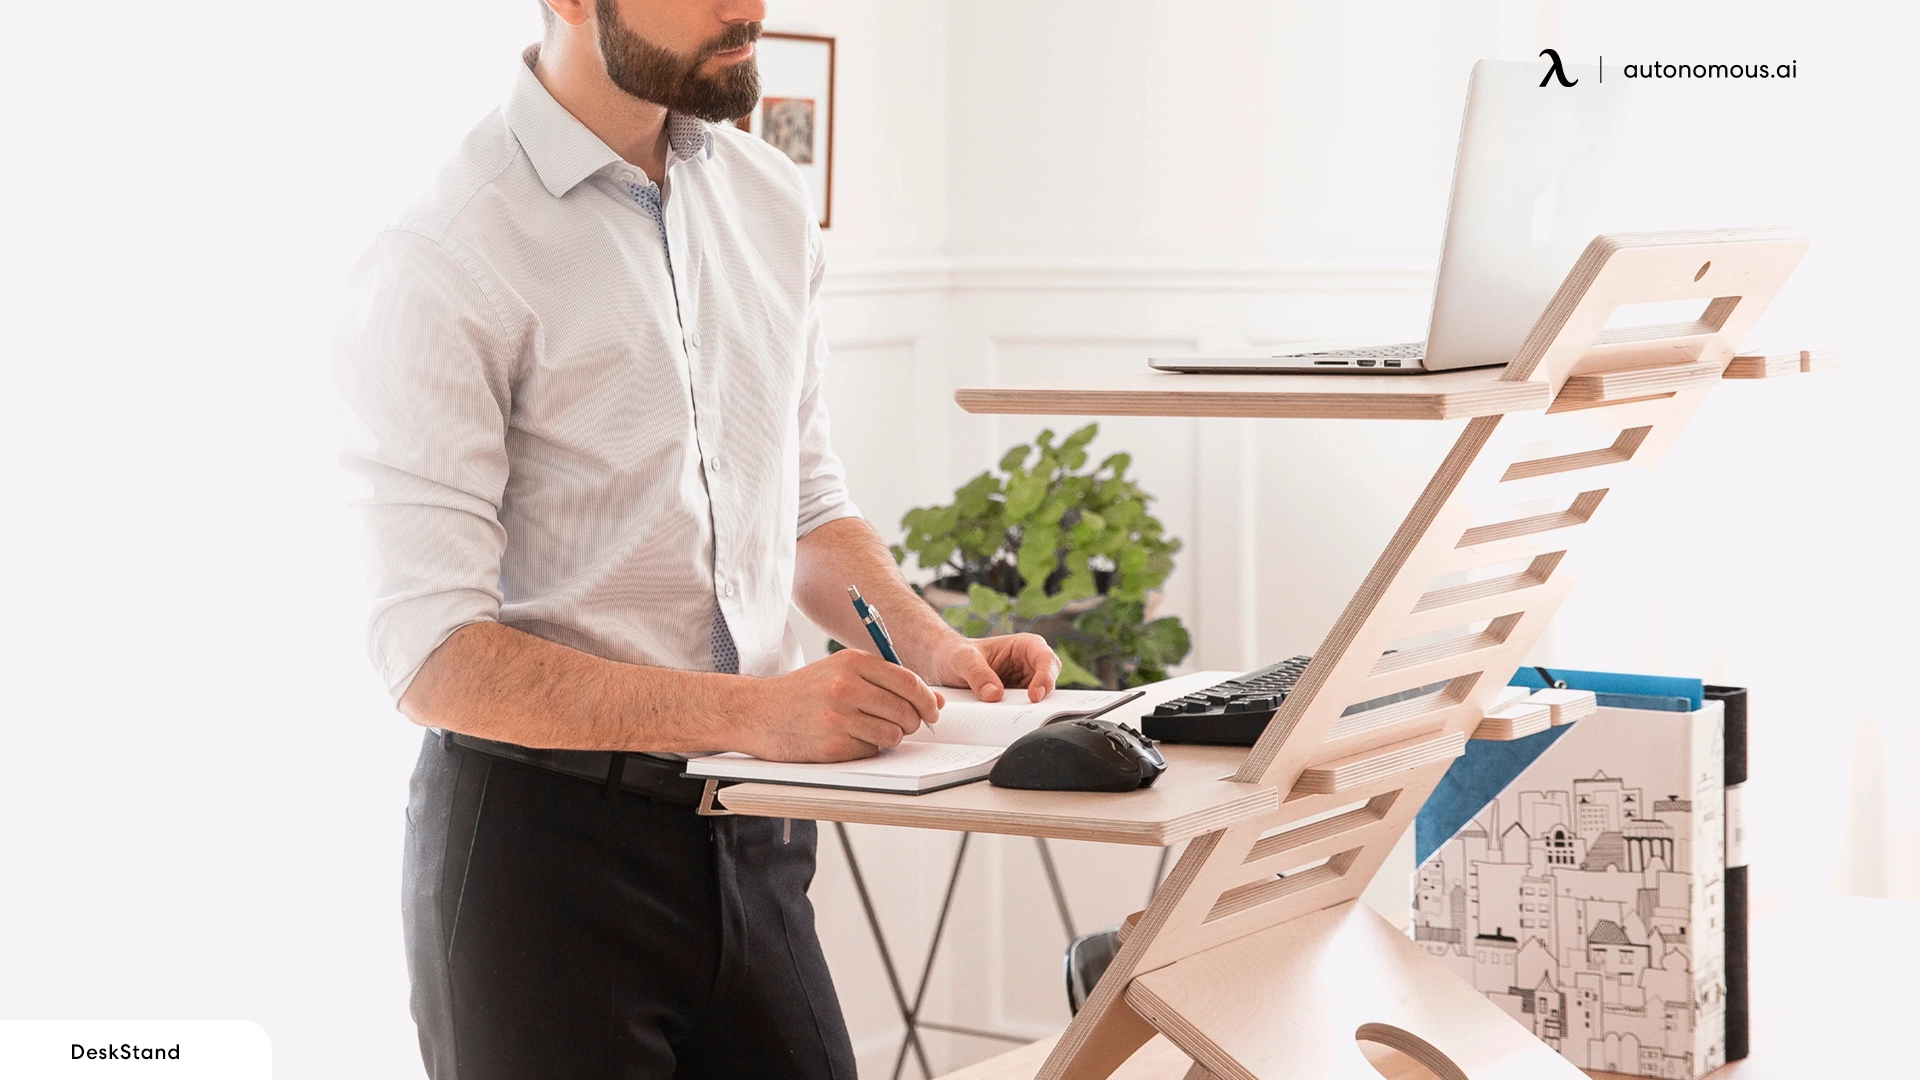 Why Do You Need a Desk Riser for a Standing Desk?